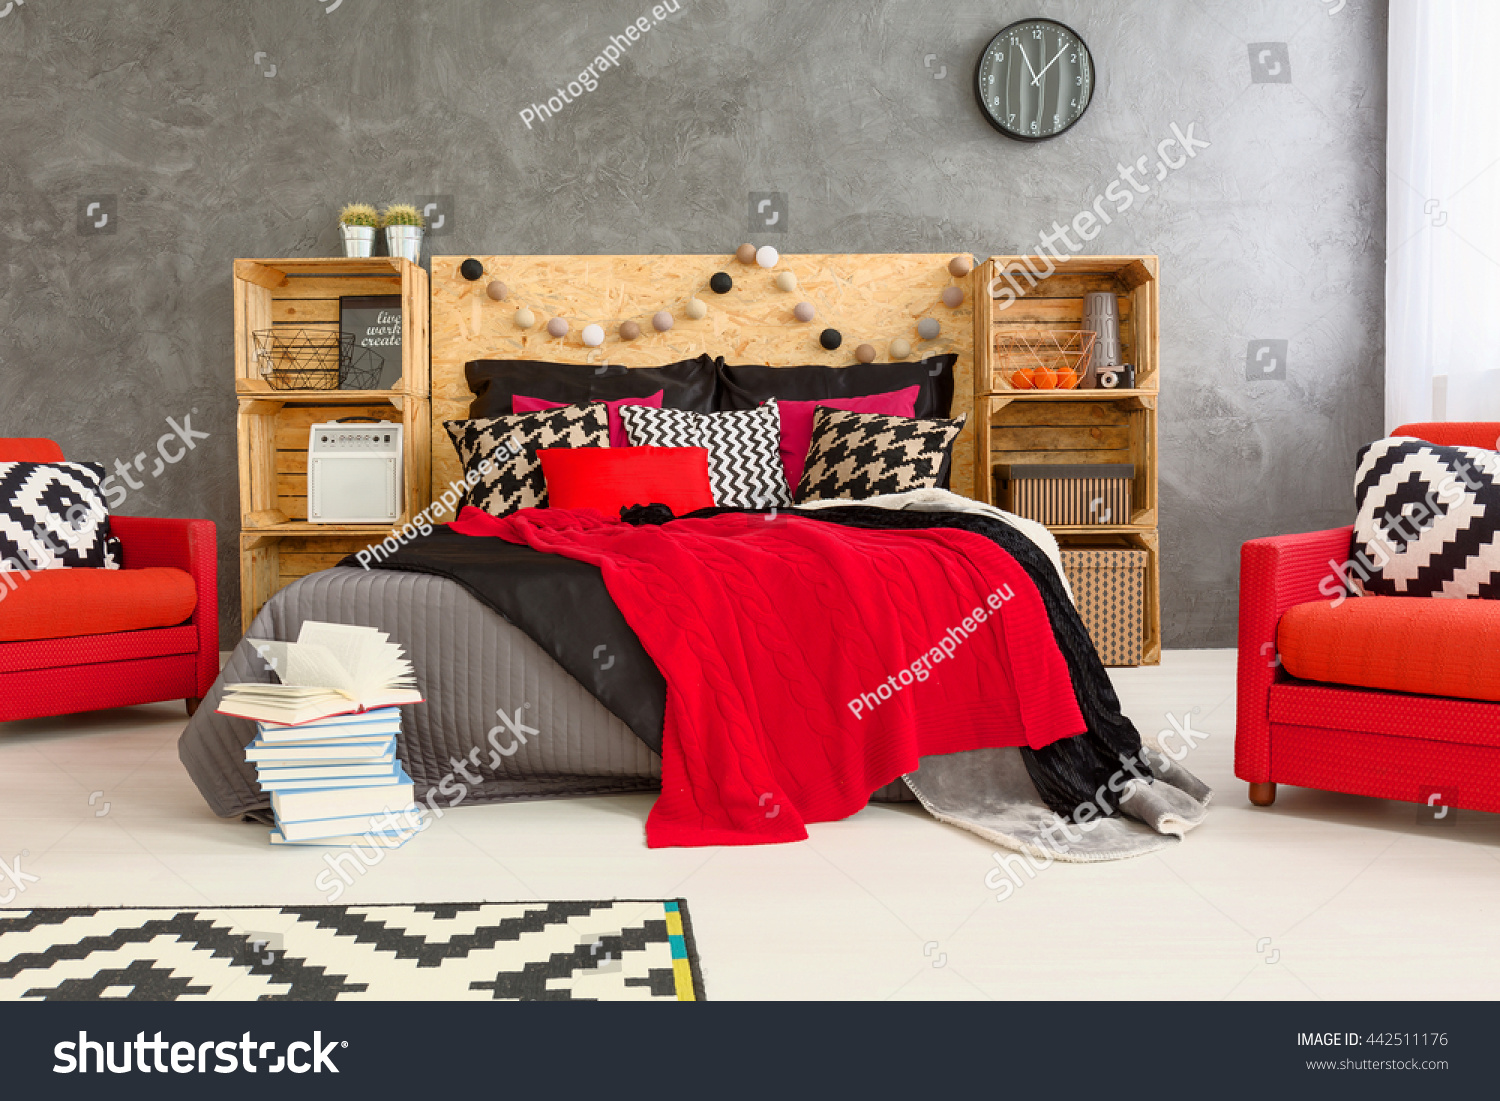 Grey room with double bed with wooden headboard. Red comfortable armchairs and wooden shelves in spacious bedroom #442511176